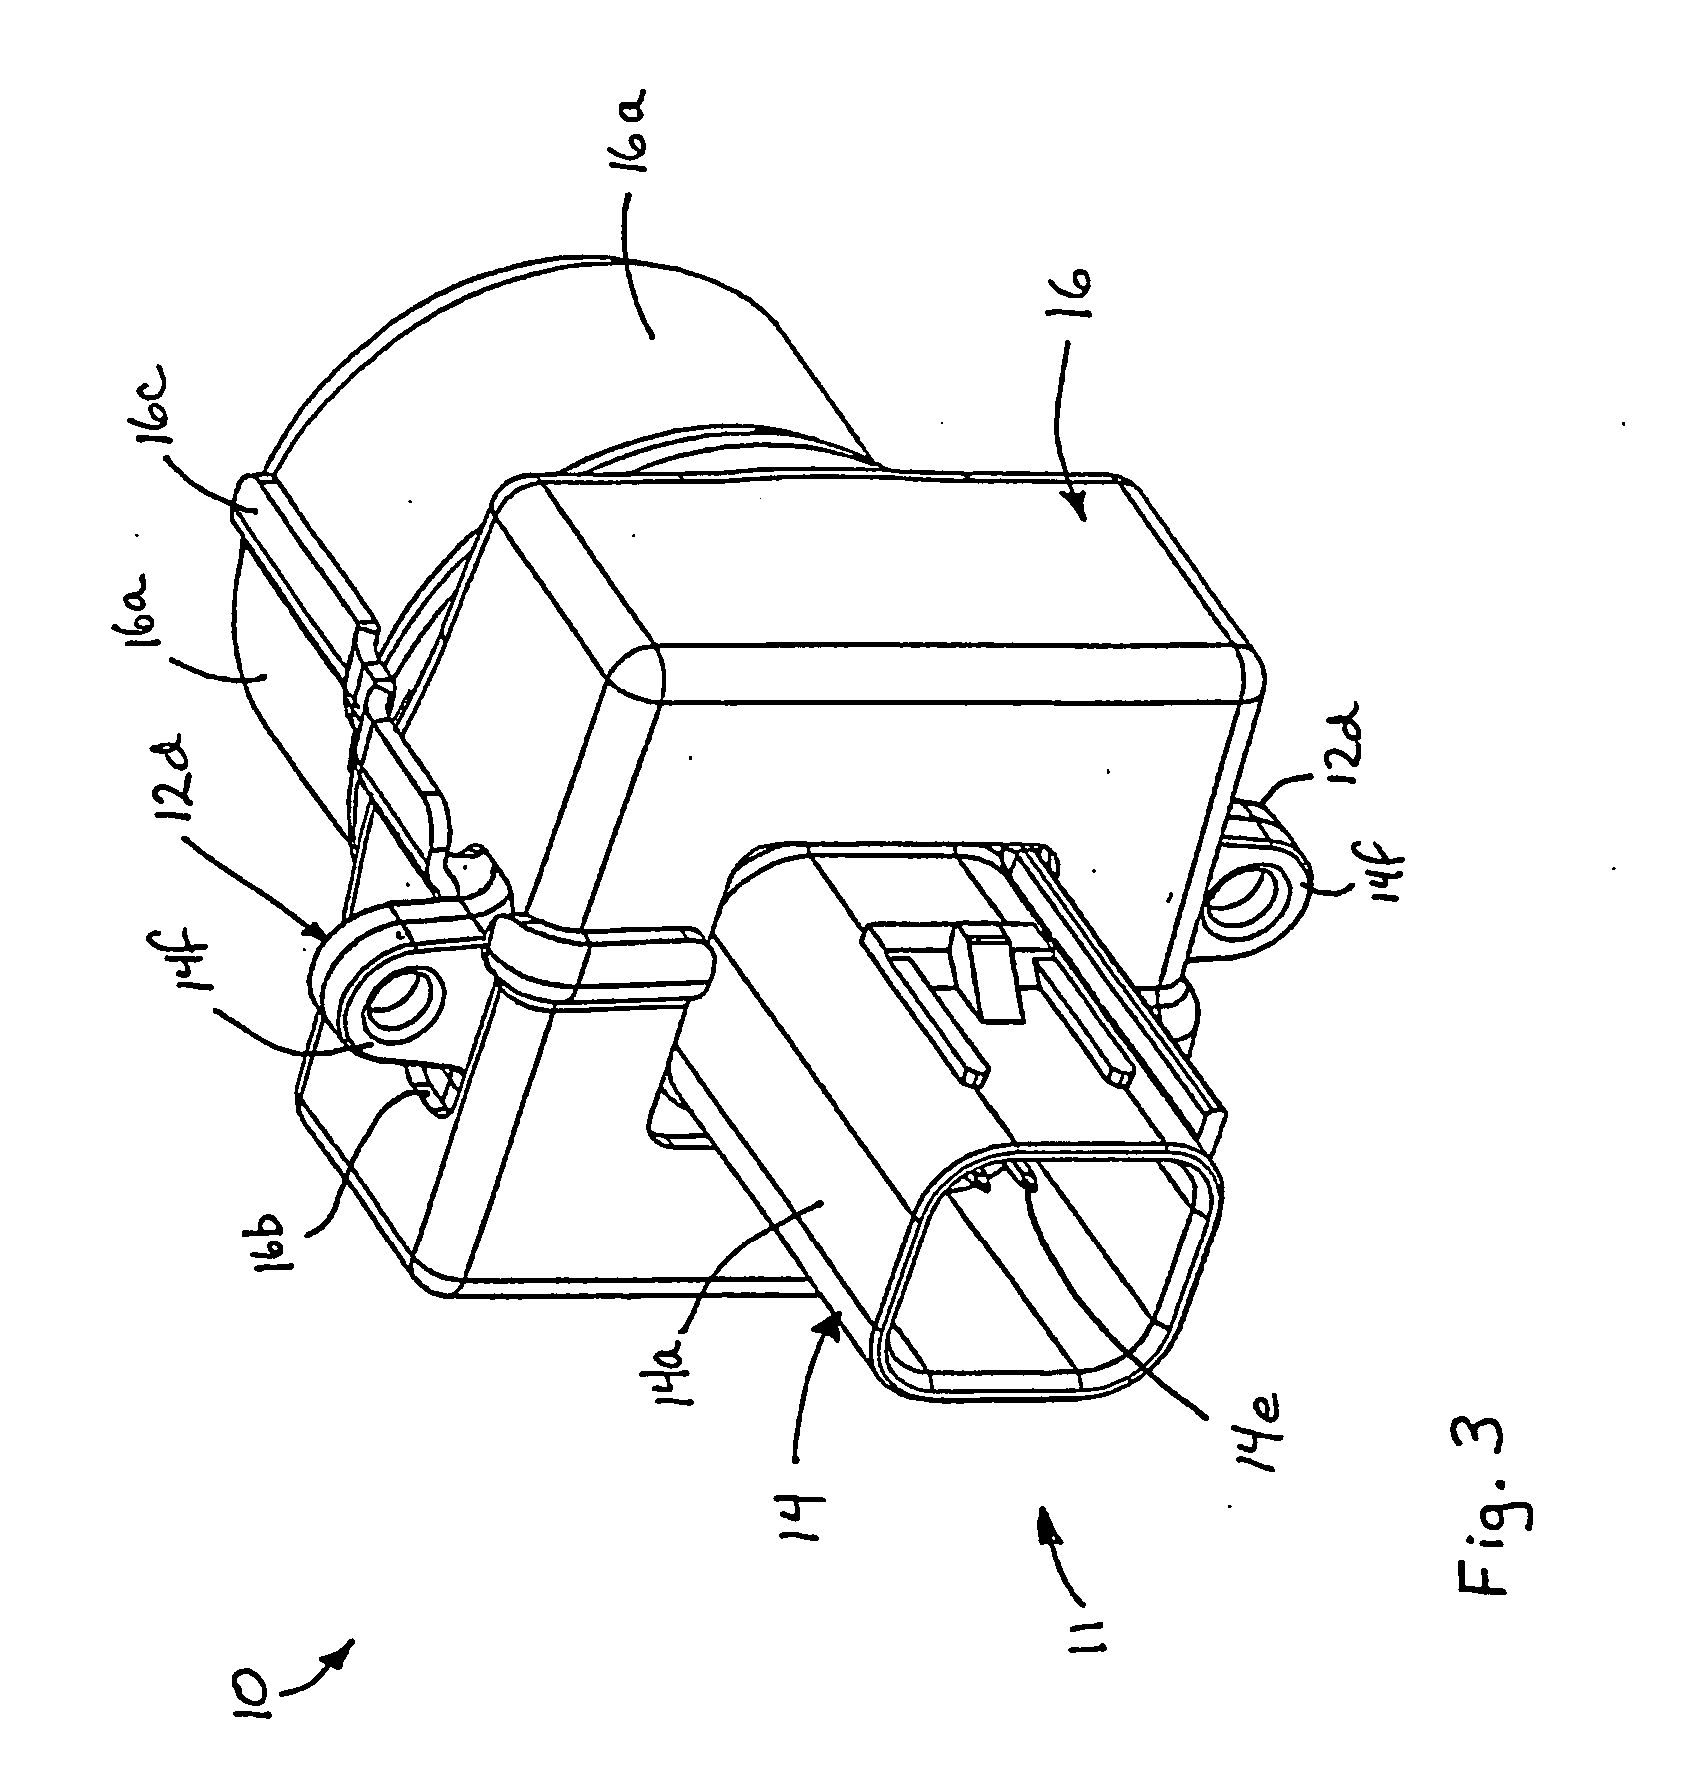 Imaging system for vehicle